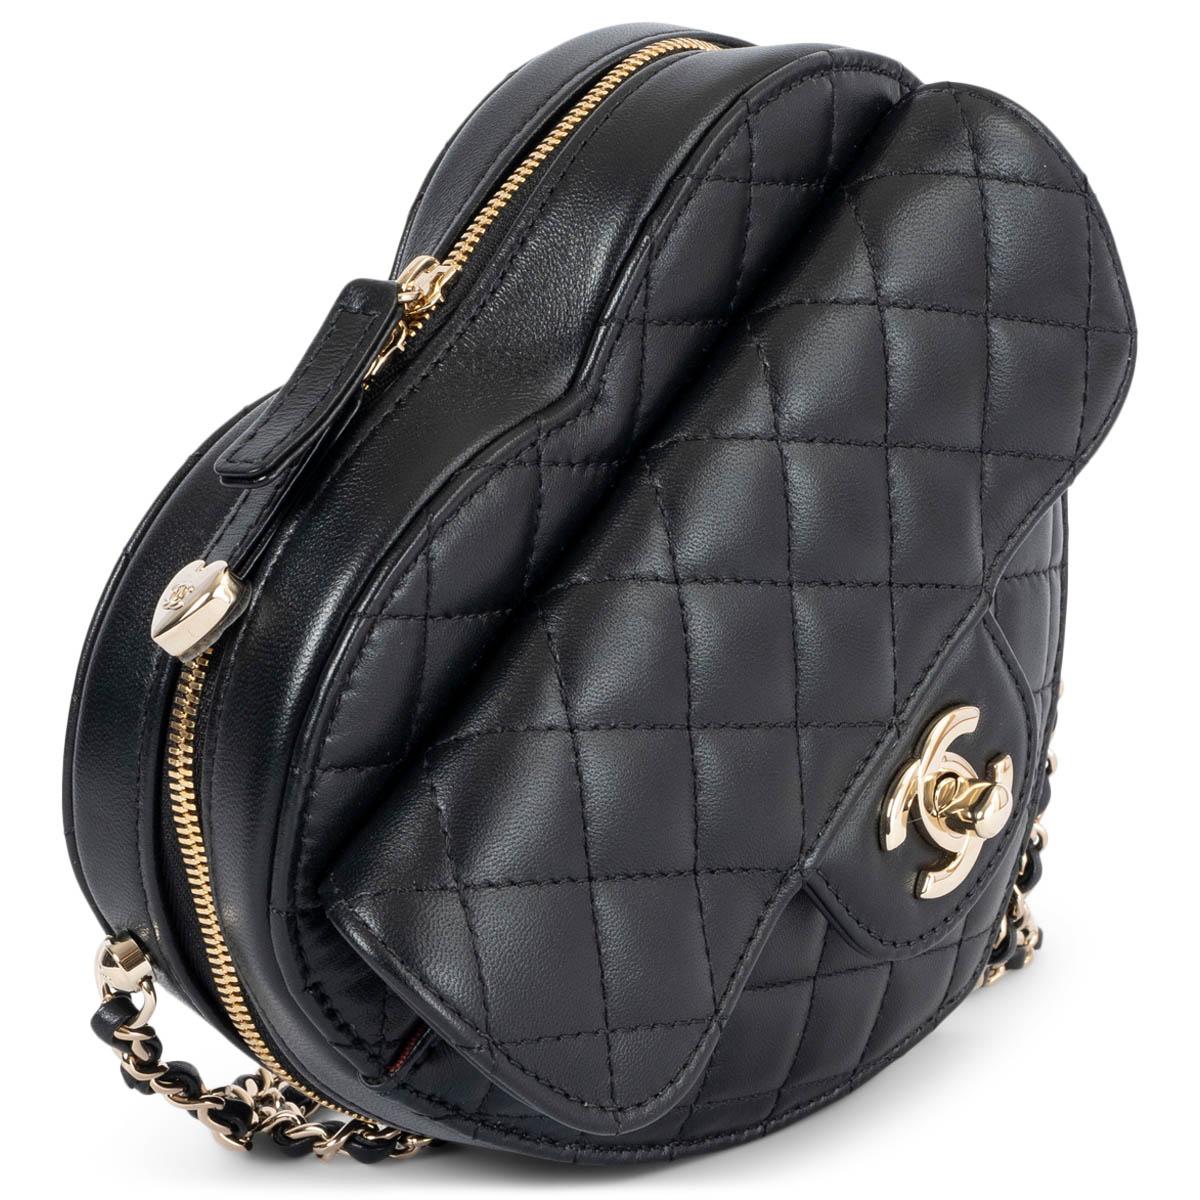 100% authentic Chanel Heart bag in black quilted leather with light gold-plated hardware. Features a flap pocket on the front with CC turn-lock, an open pocket on the back and classic chain strap. Closes with a zipper on top. Lined in burgundy